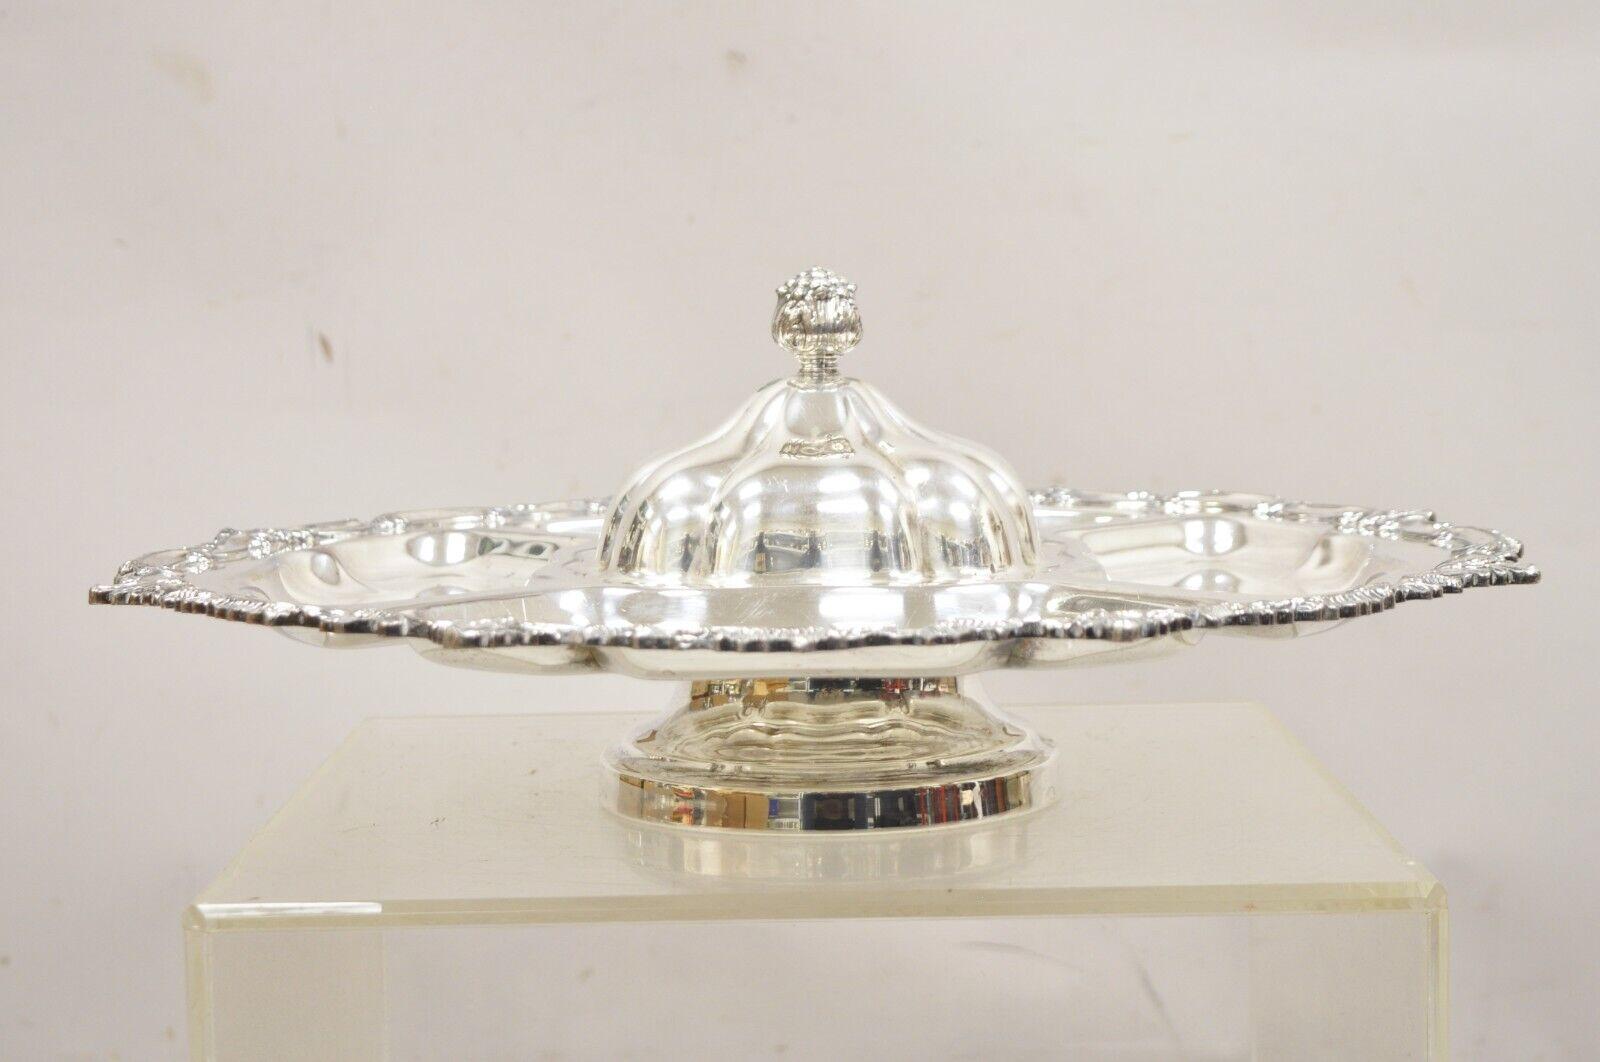 Vintage Victorian Style Silver Plated English Revolving Vegetable Serving Platter. Item features a spinning/revolving lazy Susan pedestal base, removable center lid, original hallmark, very nice vintage item. Circa Mid 20th Century. Measurements: 